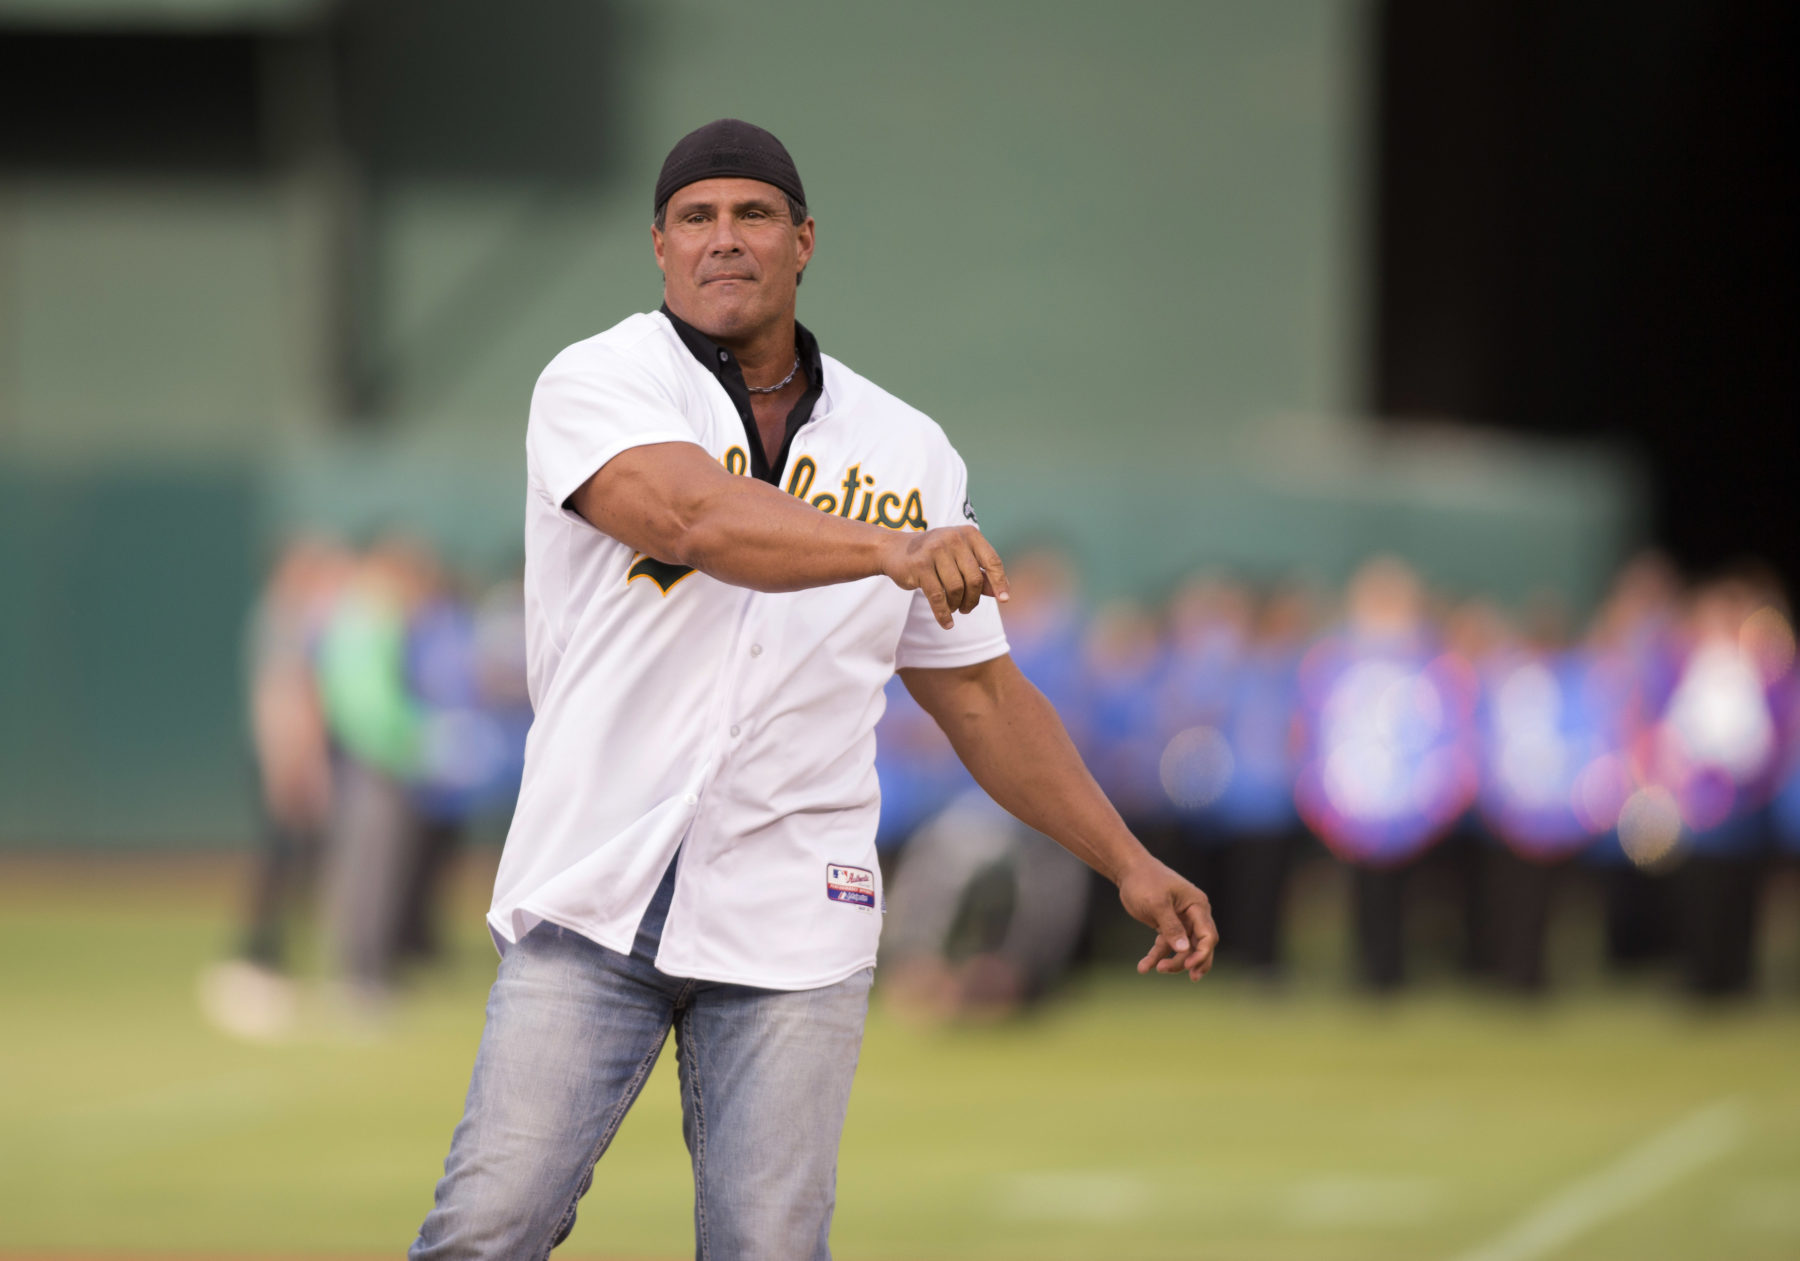 jose canseco-oakland athletics